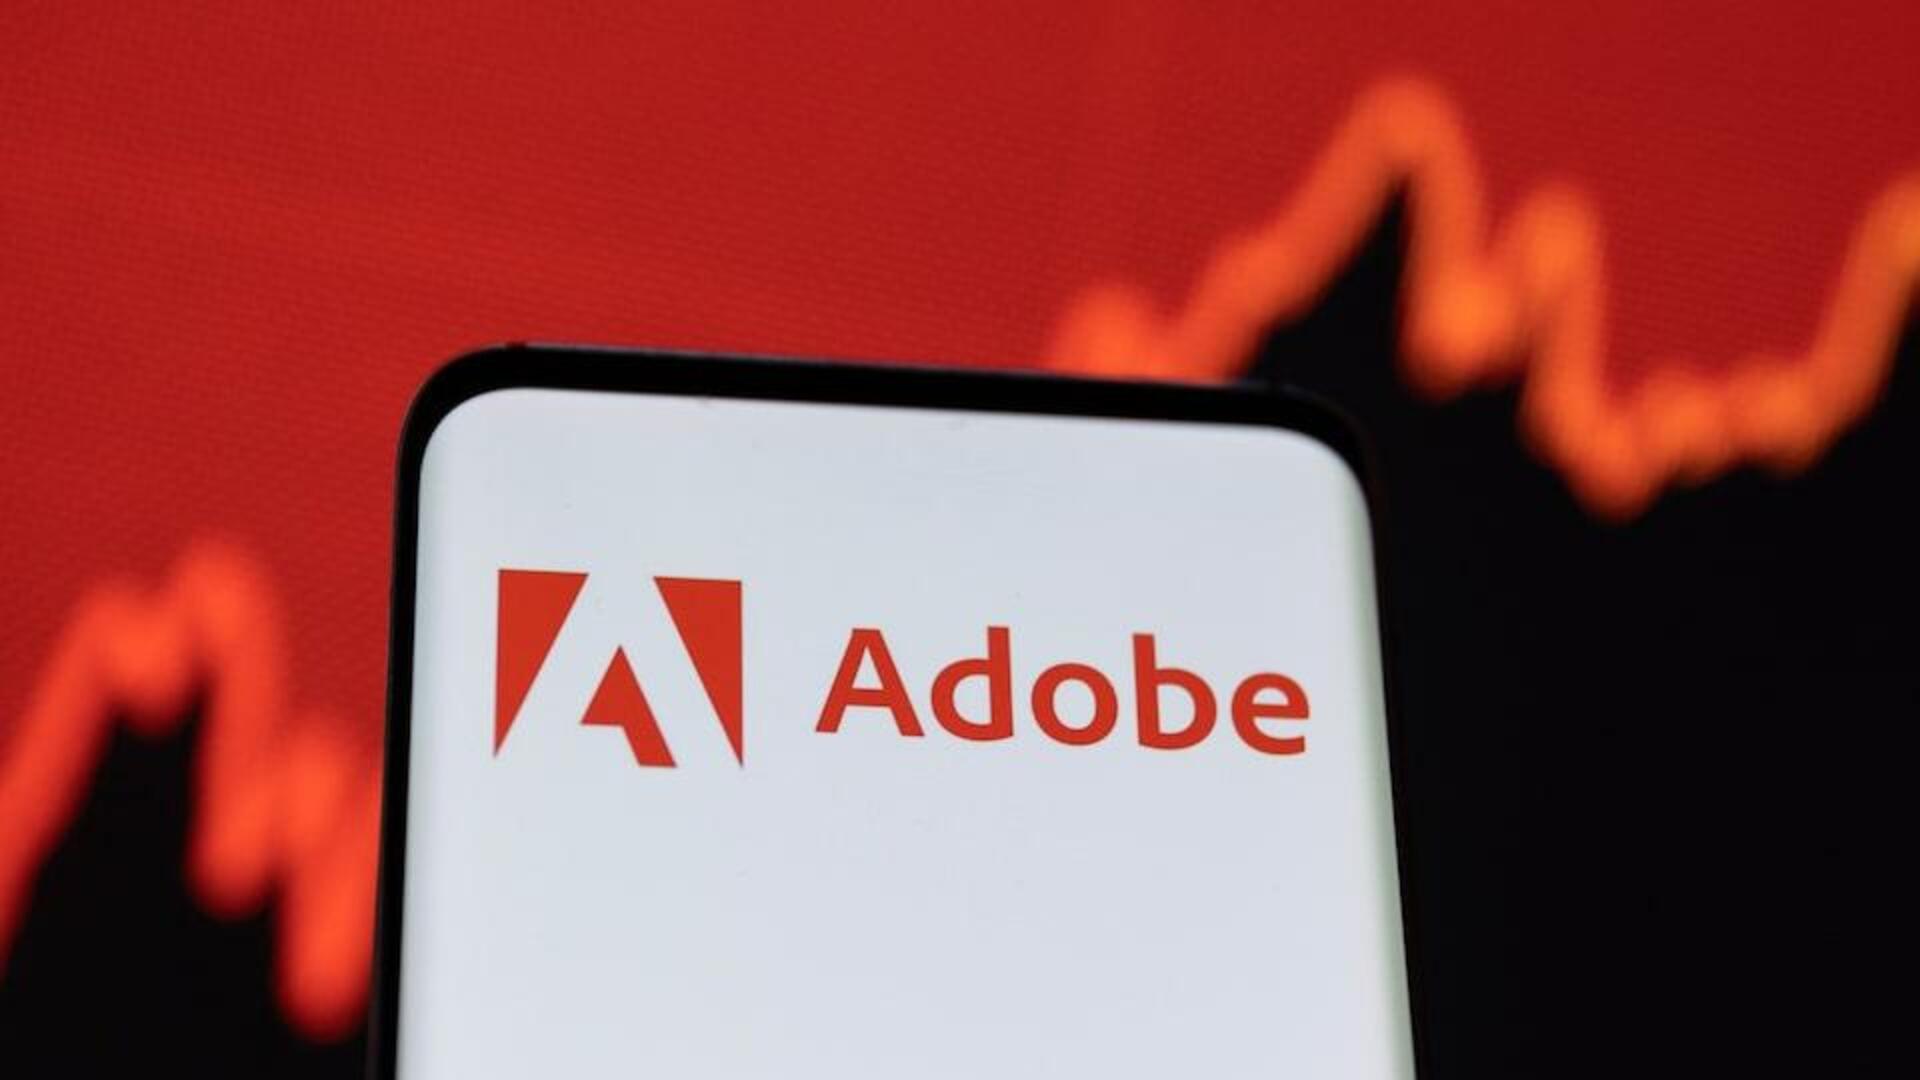 Adobe is purchasing video content to train its AI model